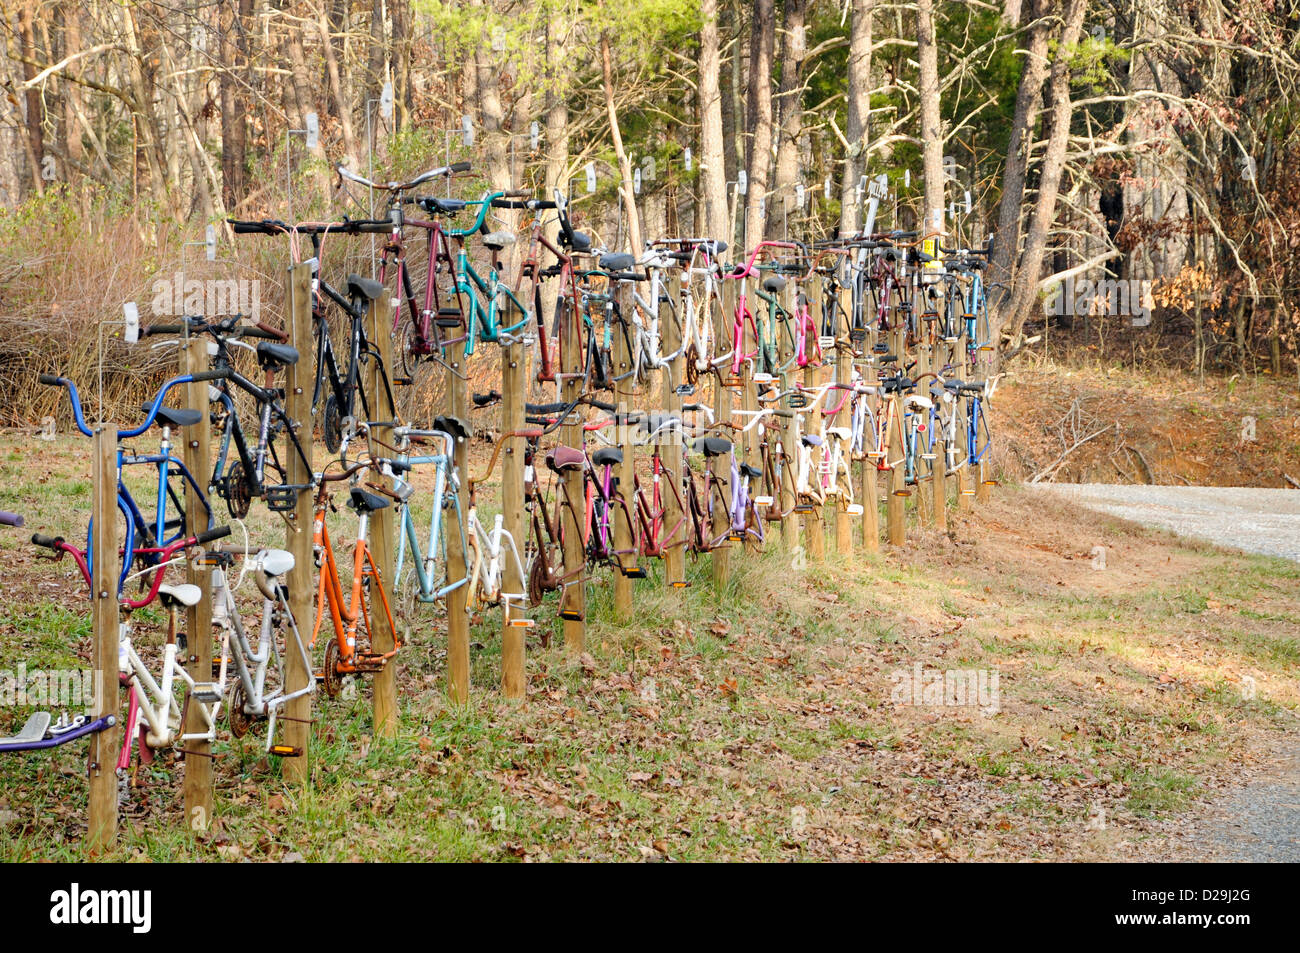 Fence Of Bicycle Frames, Virginia Stock Photo